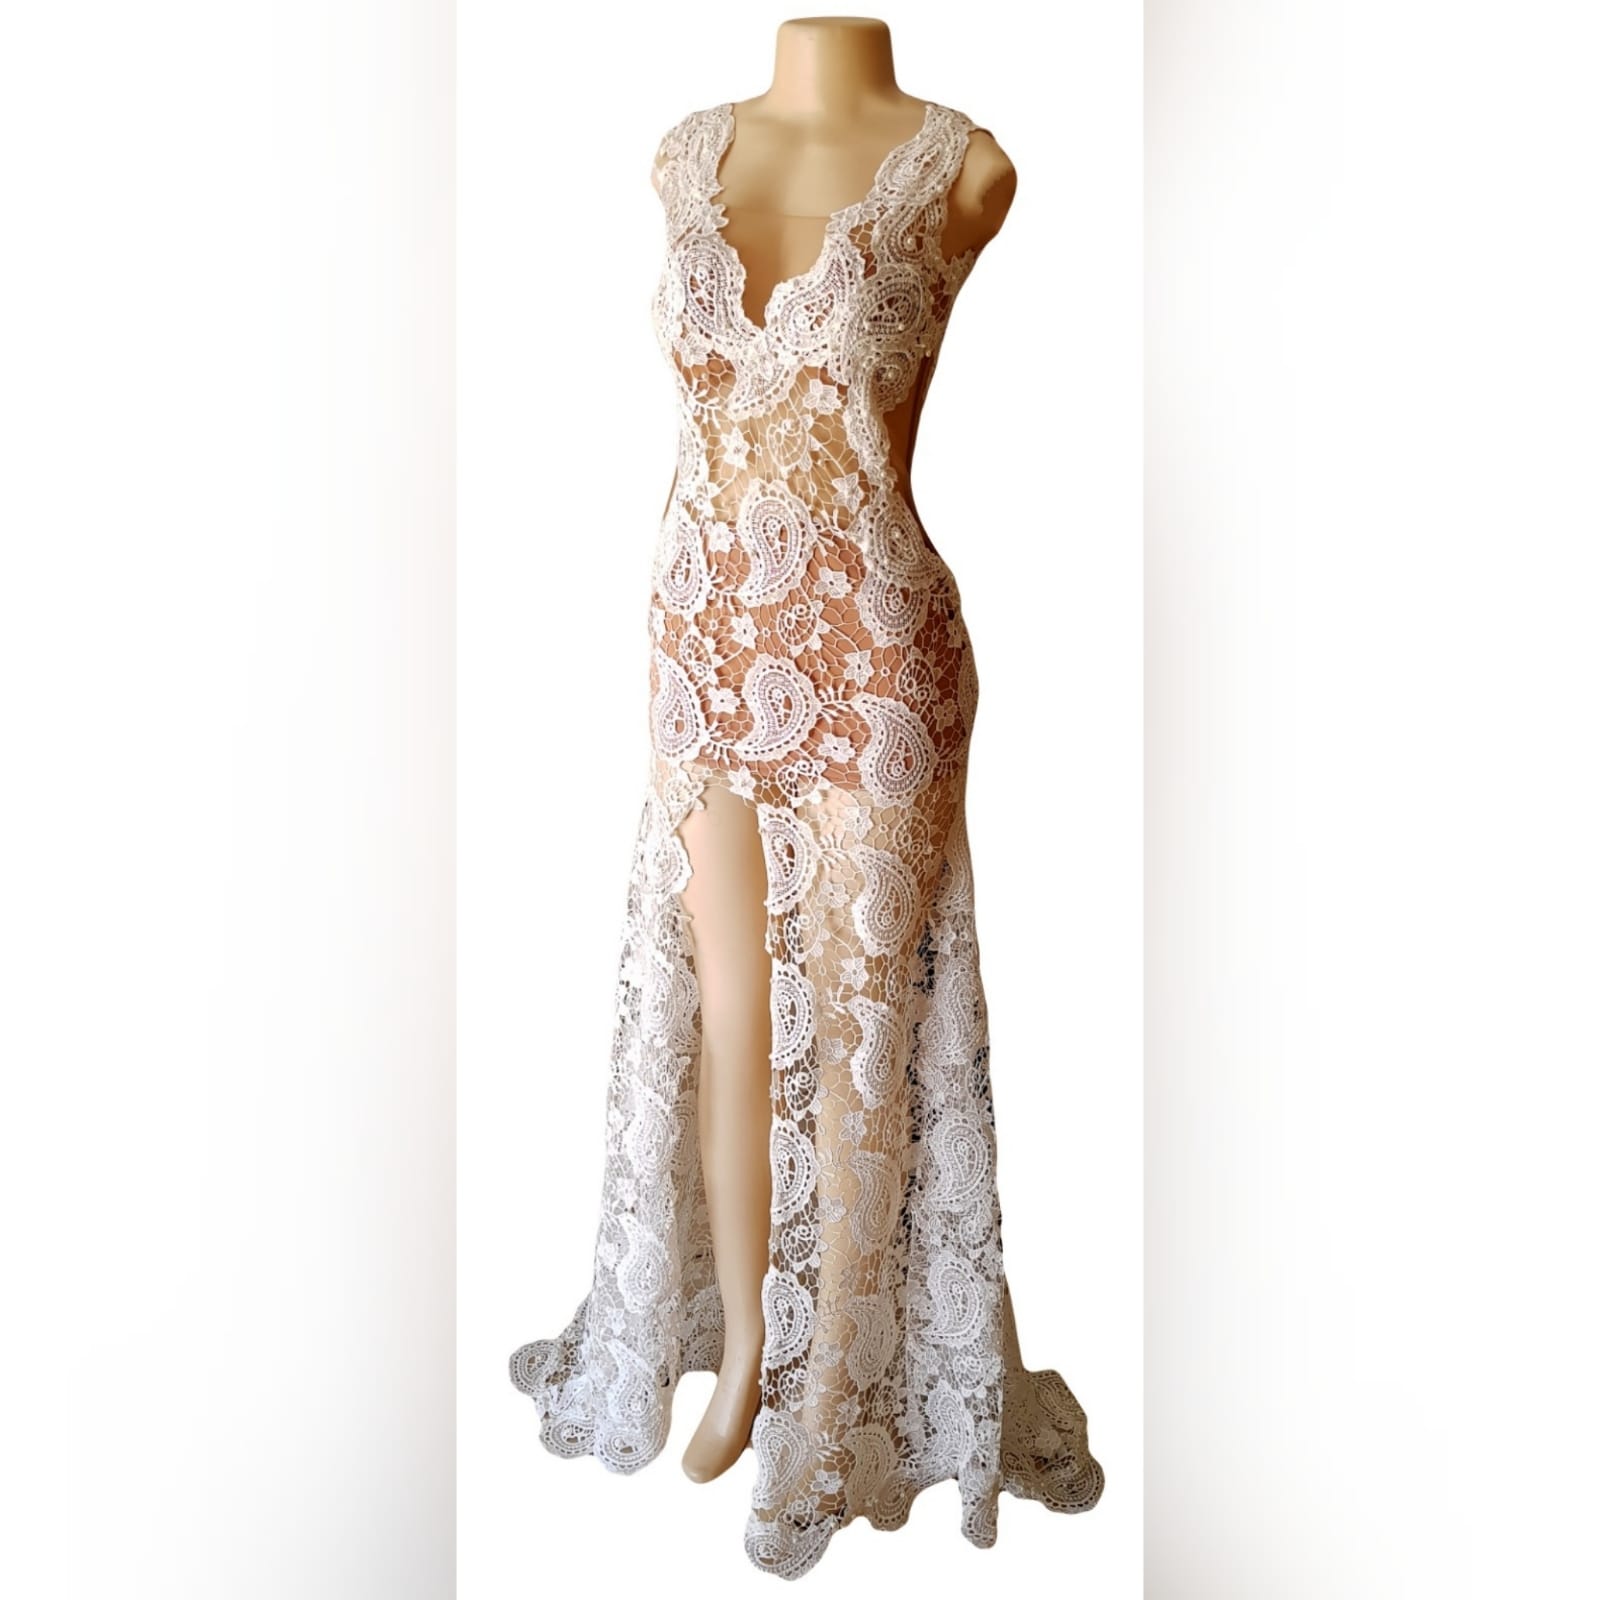 Classic long white lace gala dress 7 <blockquote>"doubt is a killer. You just have to know who you are and what you stand for. " jennifer lopez</blockquote> a classic long white lace gala dress created for my client to feel sophisticated and unique in her special occasion. Created with intention on bringing some sensuality to the design by adding translucent lace on the tummy and legs, see through sides and a frontal slit. Pearls finish this lace scattered throughout, with a train that just slightly sweeps the floor.